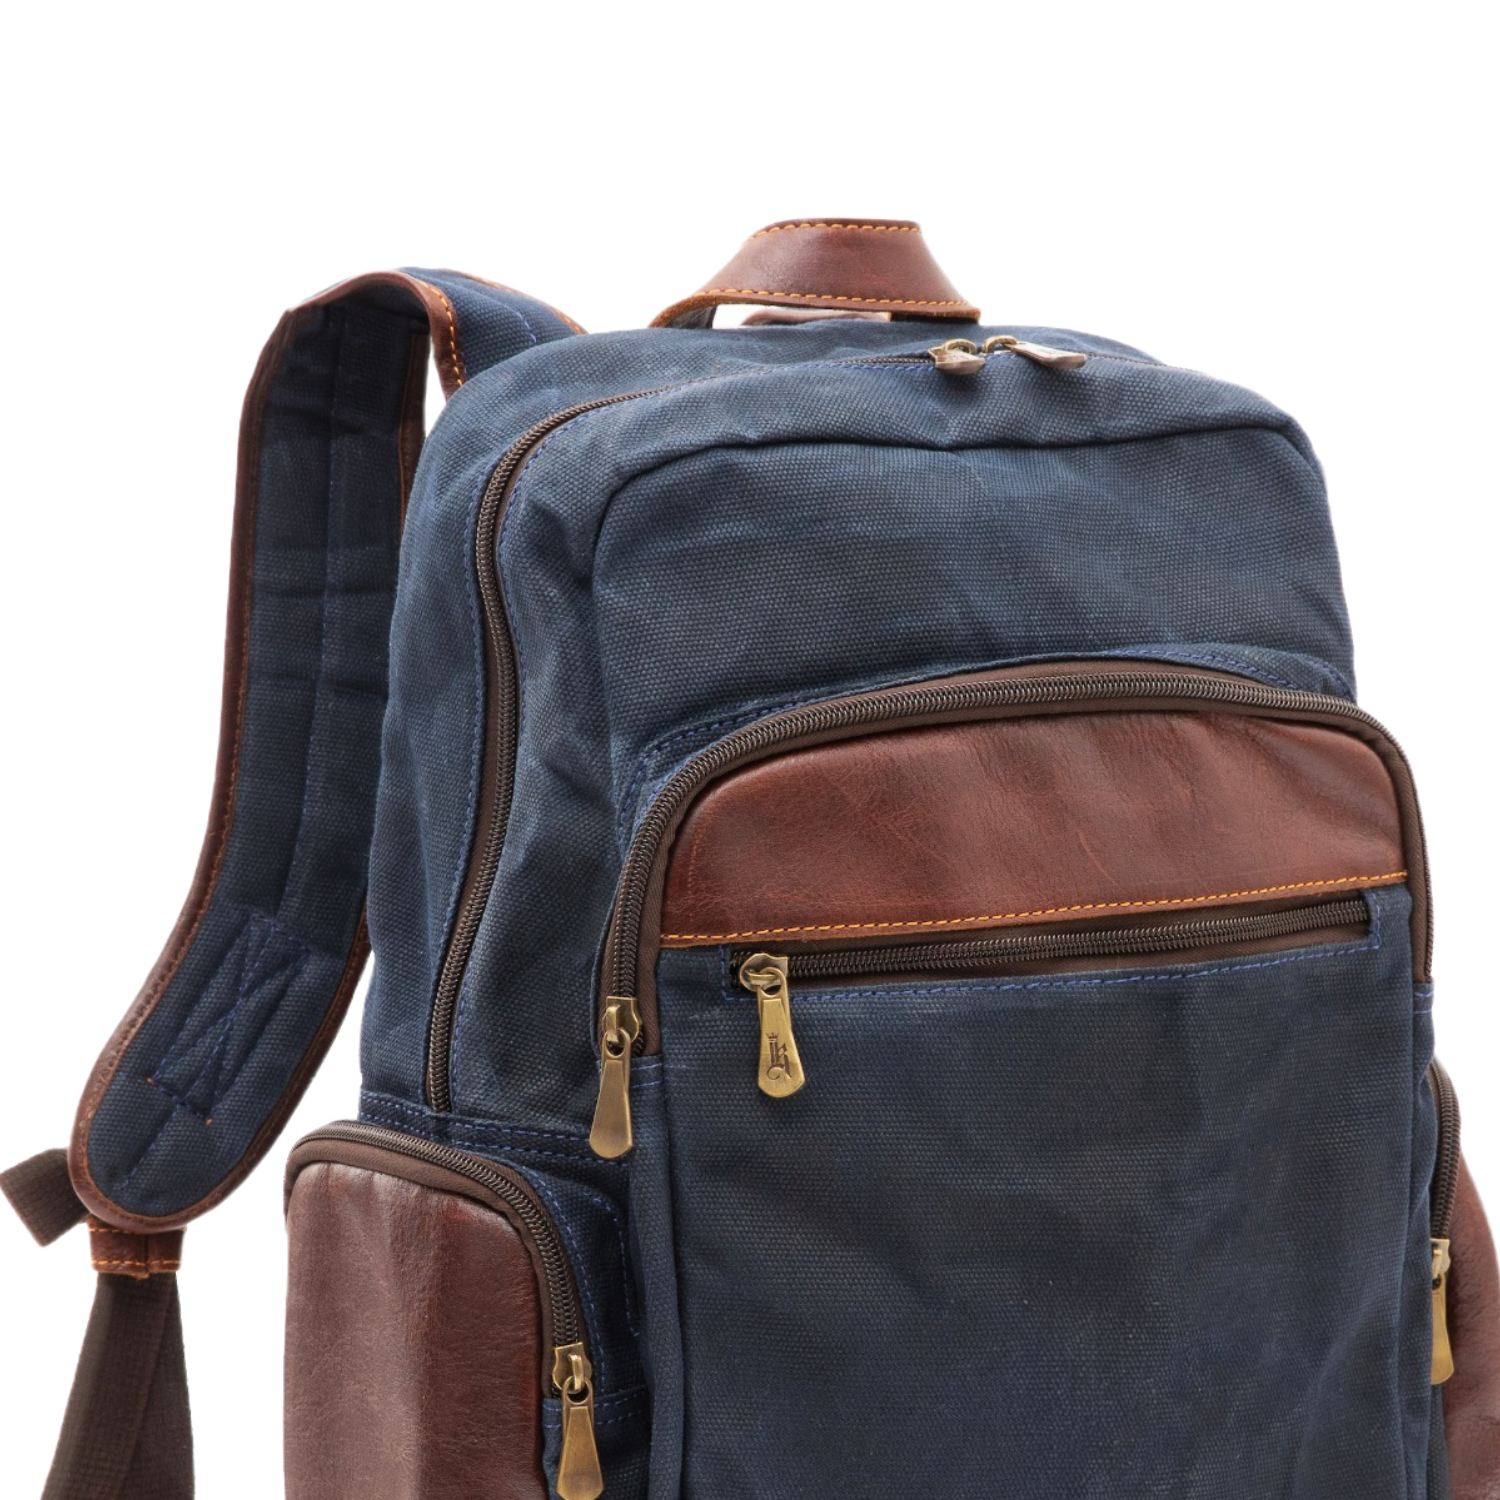 LAND Pack // Waxed Canvas Backpack - Bexar Goods Co.